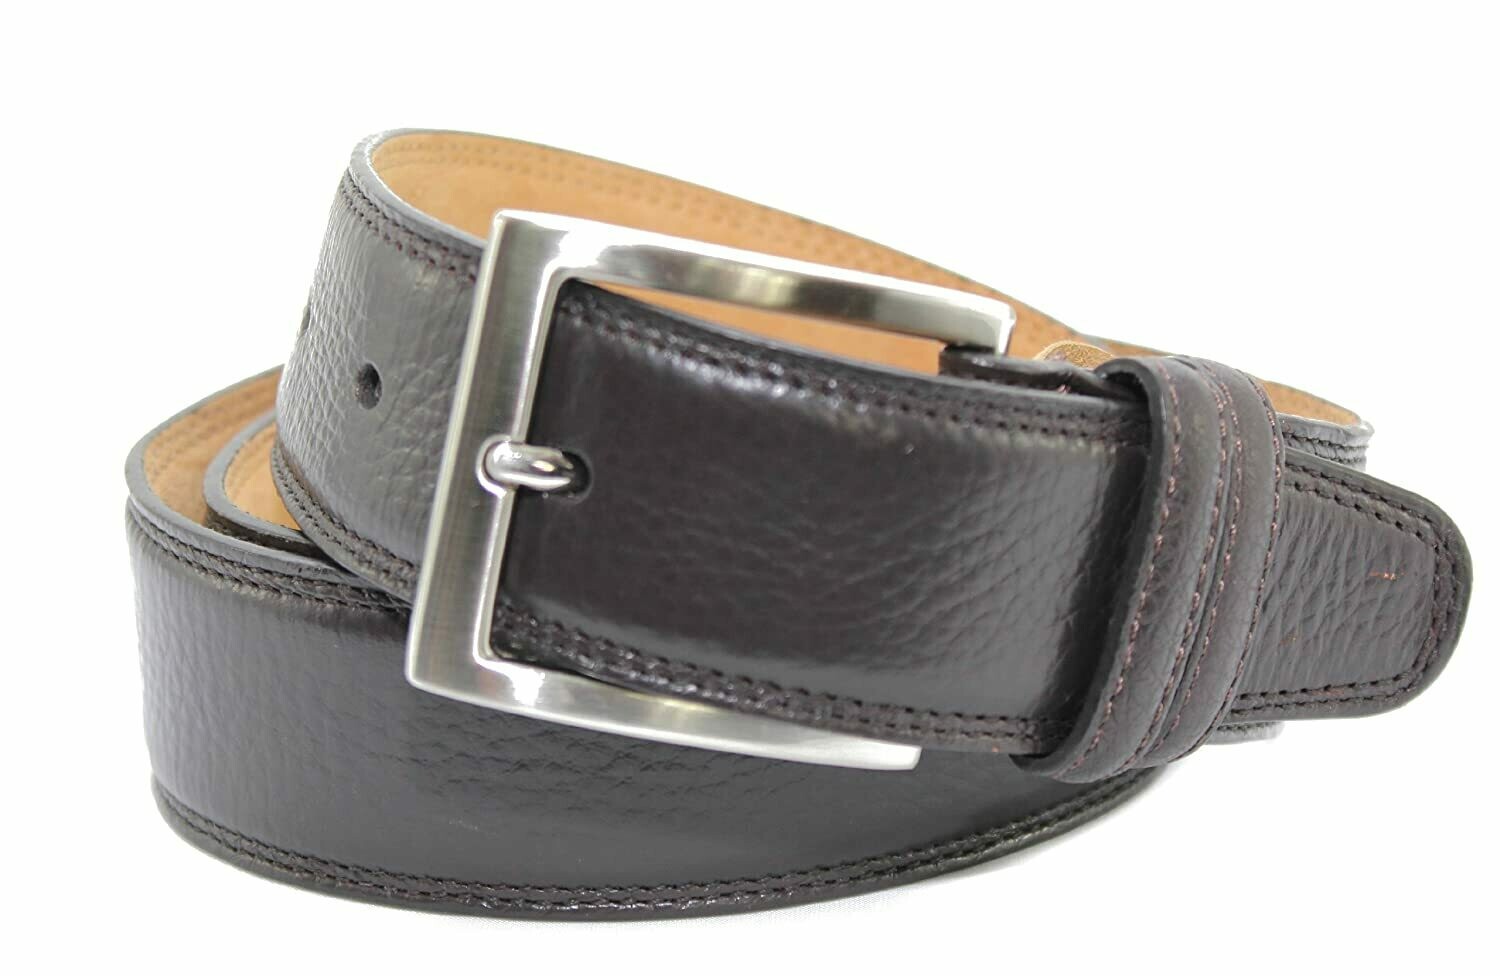 Tasso Elba Belt, Casual 35mm Milled Touch Brown 32